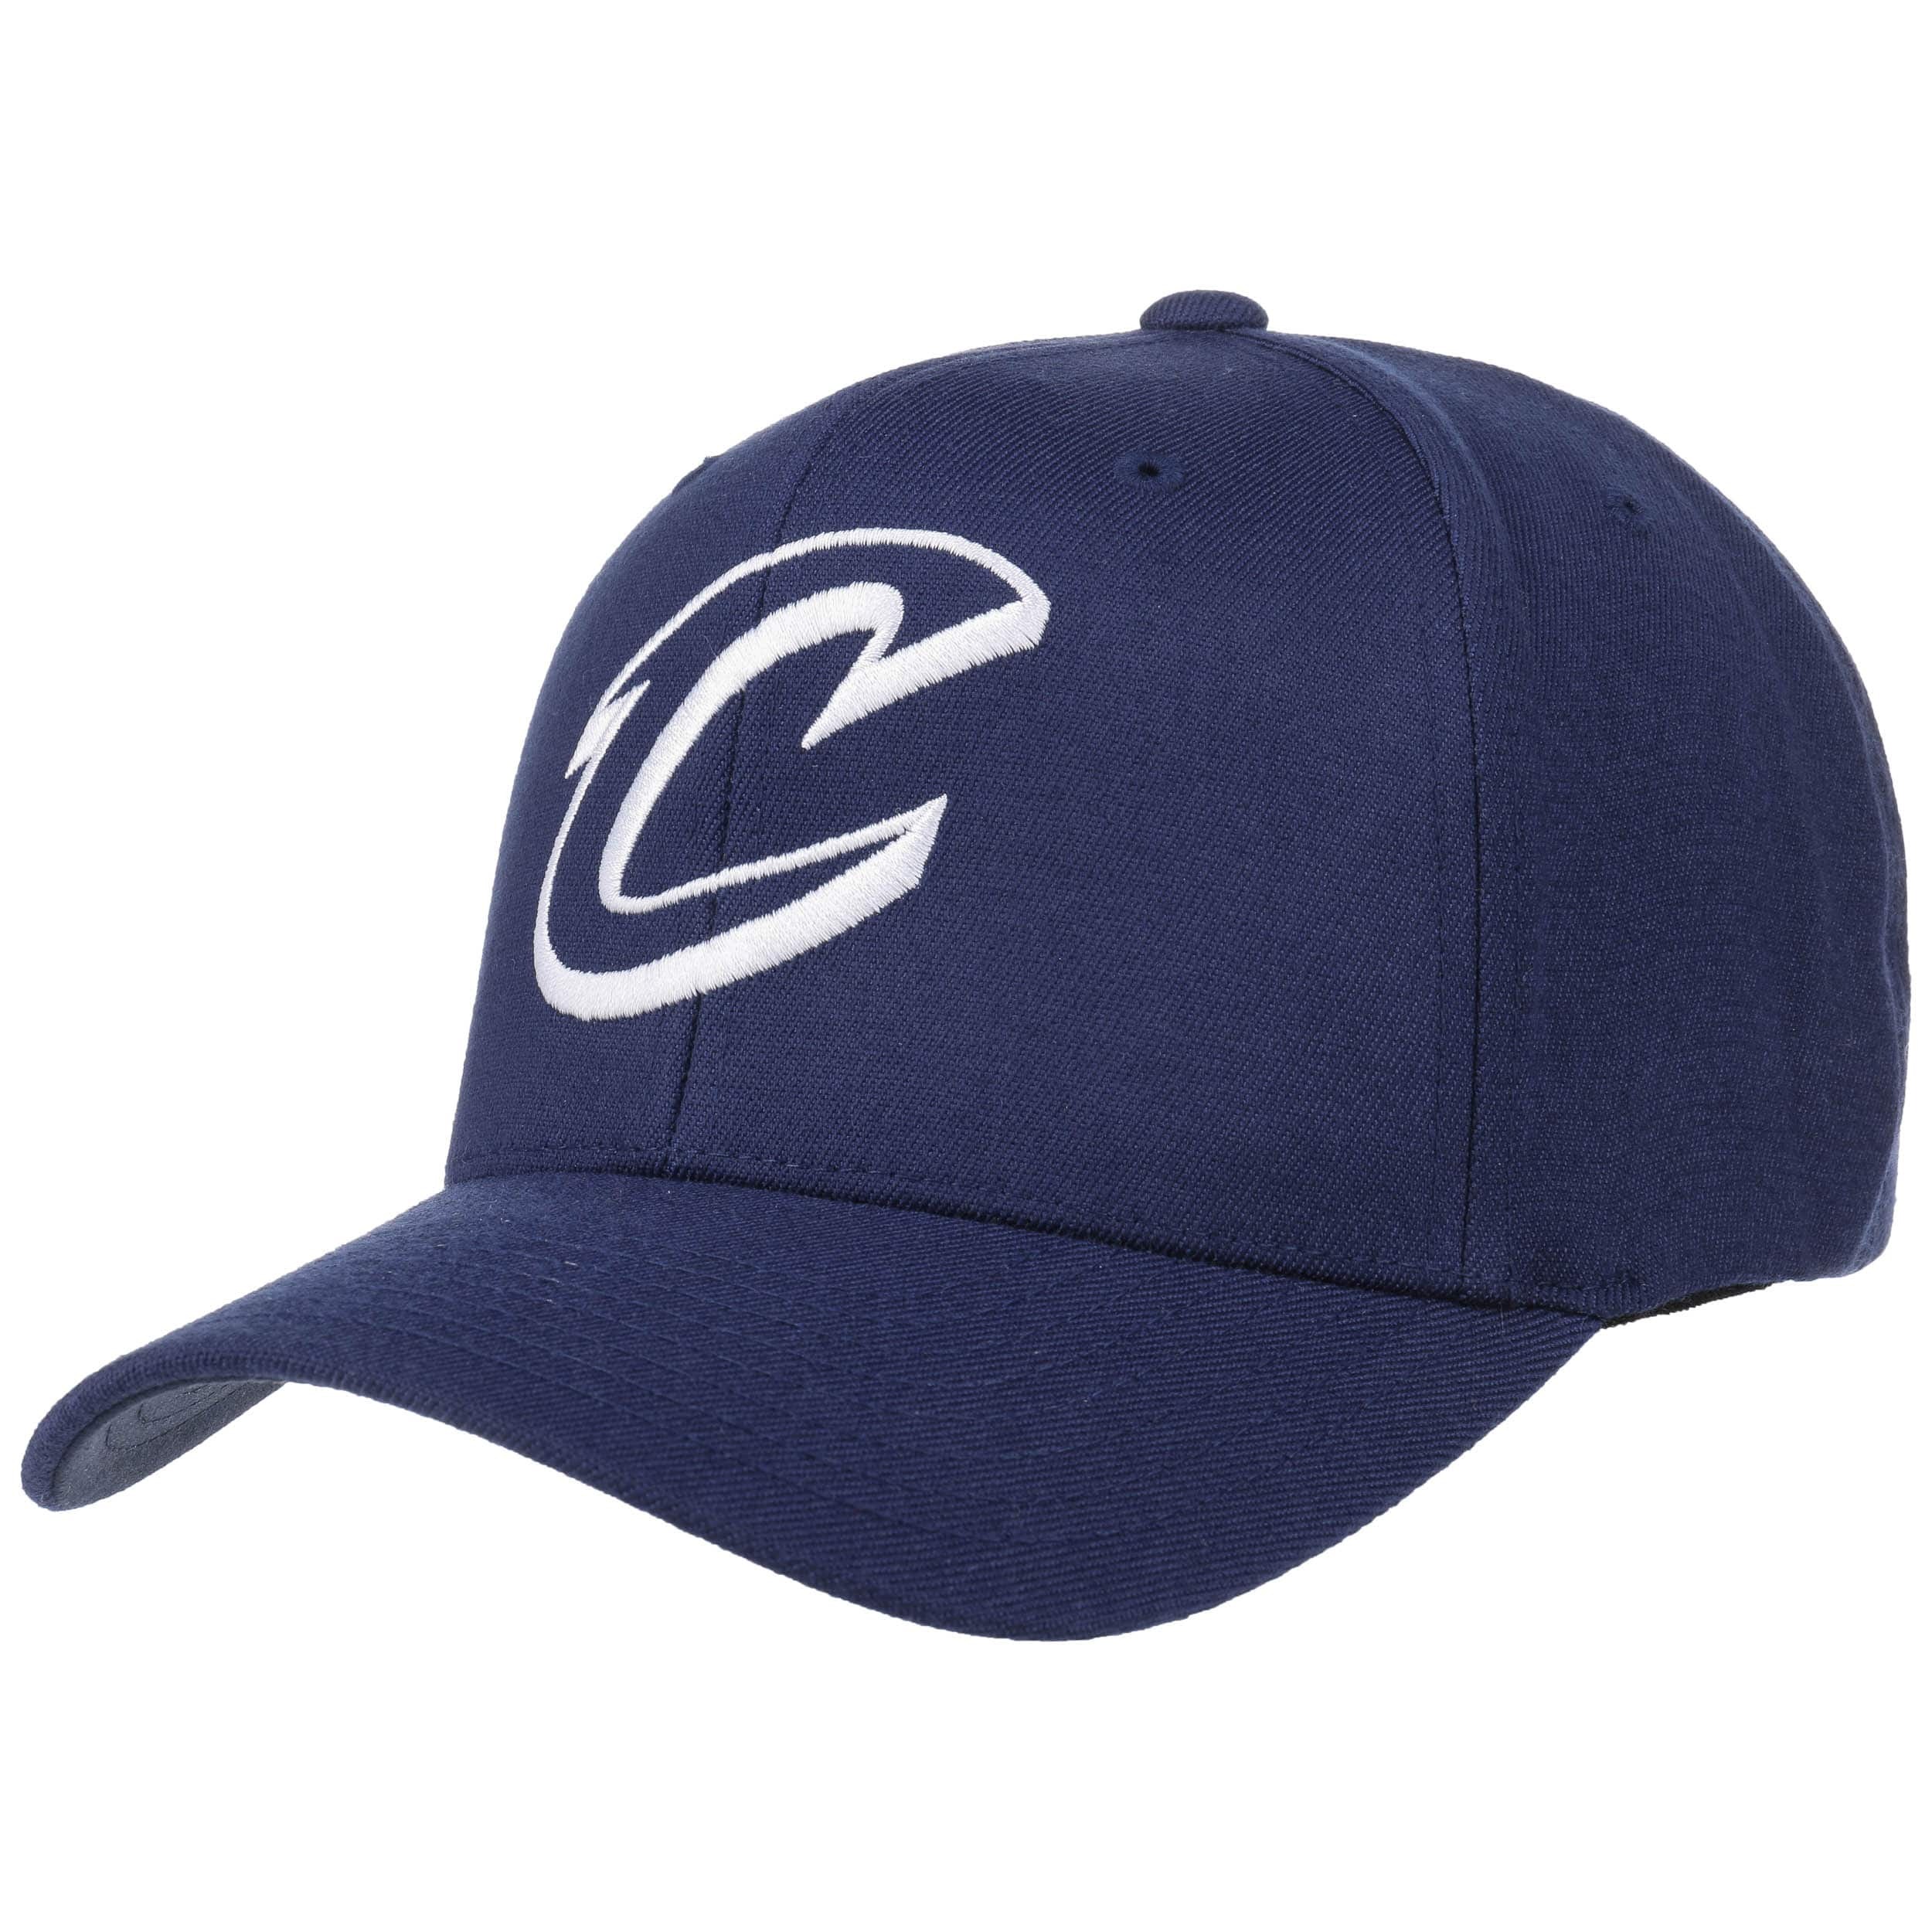 Navy 110 Cavs Cap by Mitchell & Ness 29,95